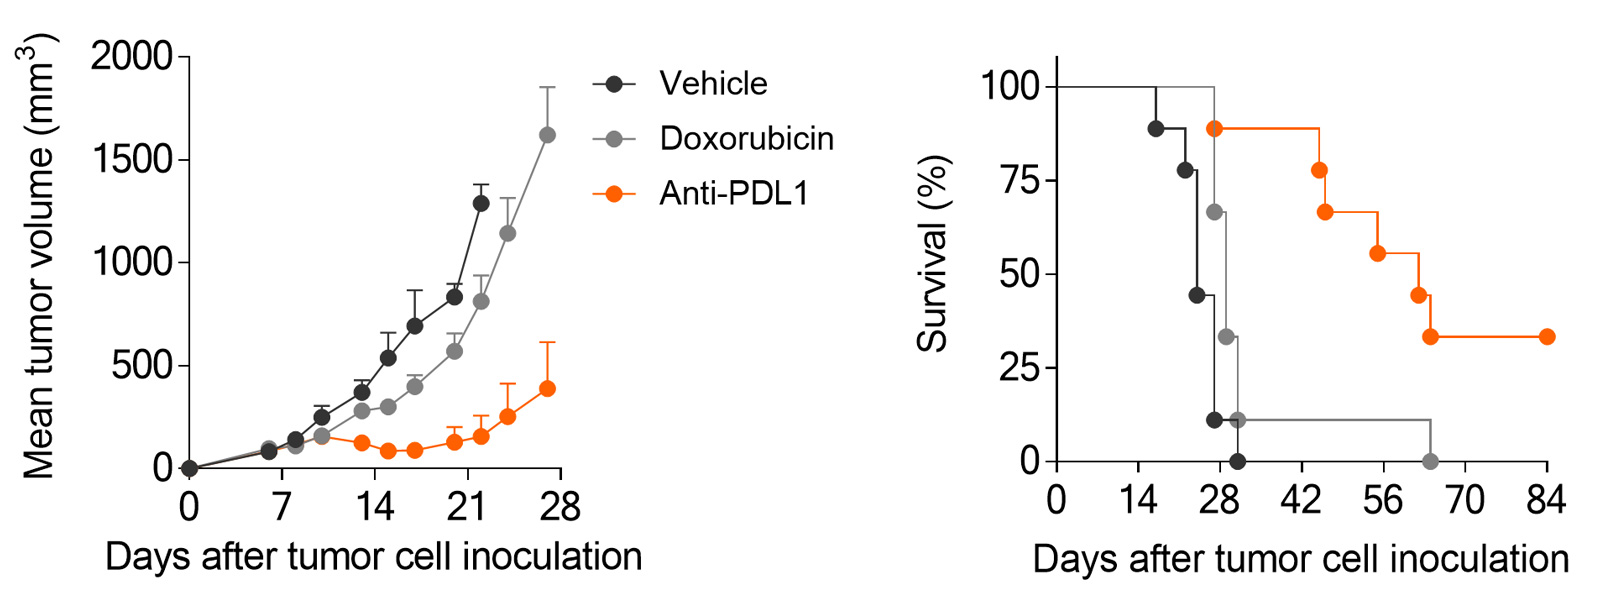 MCA205 sarcoma tumor-bearing mouse model is strongly responsive to PD1/PDL1 blockade and only partially to doxorubicin